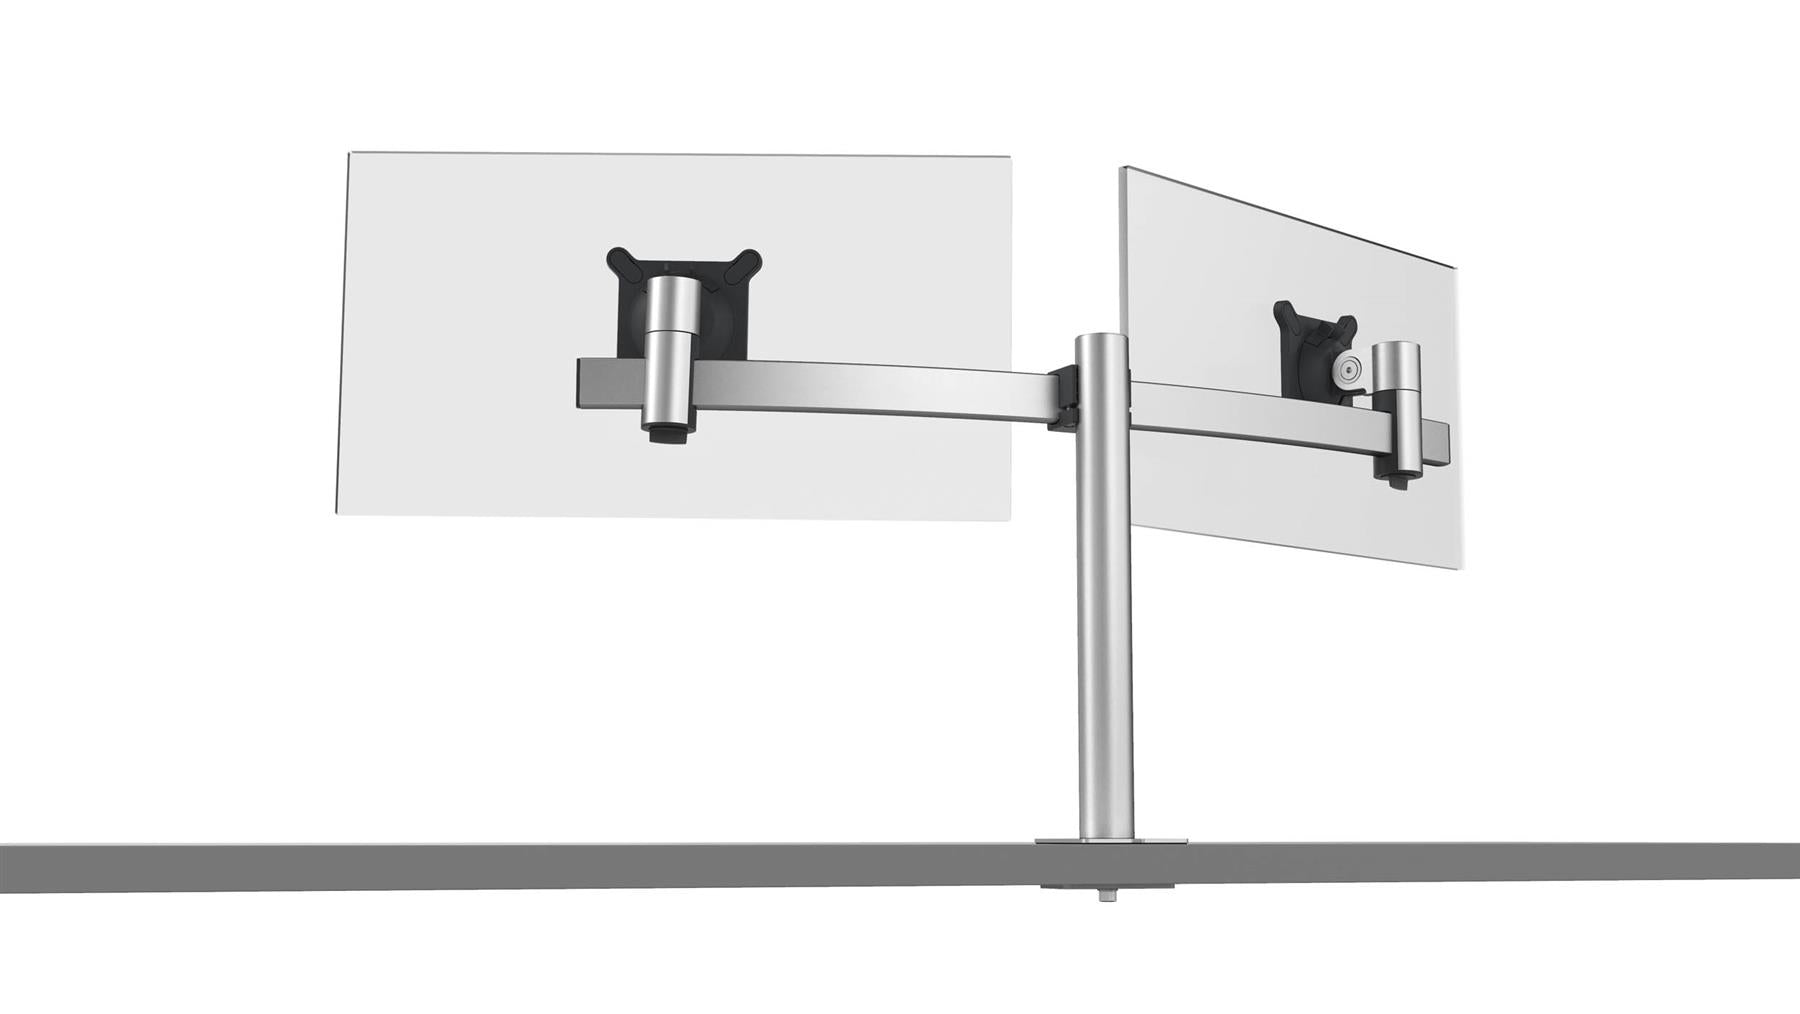 Durable Monitor Mount PRO for 2 Screens | Through-Desk Clamp Attachment